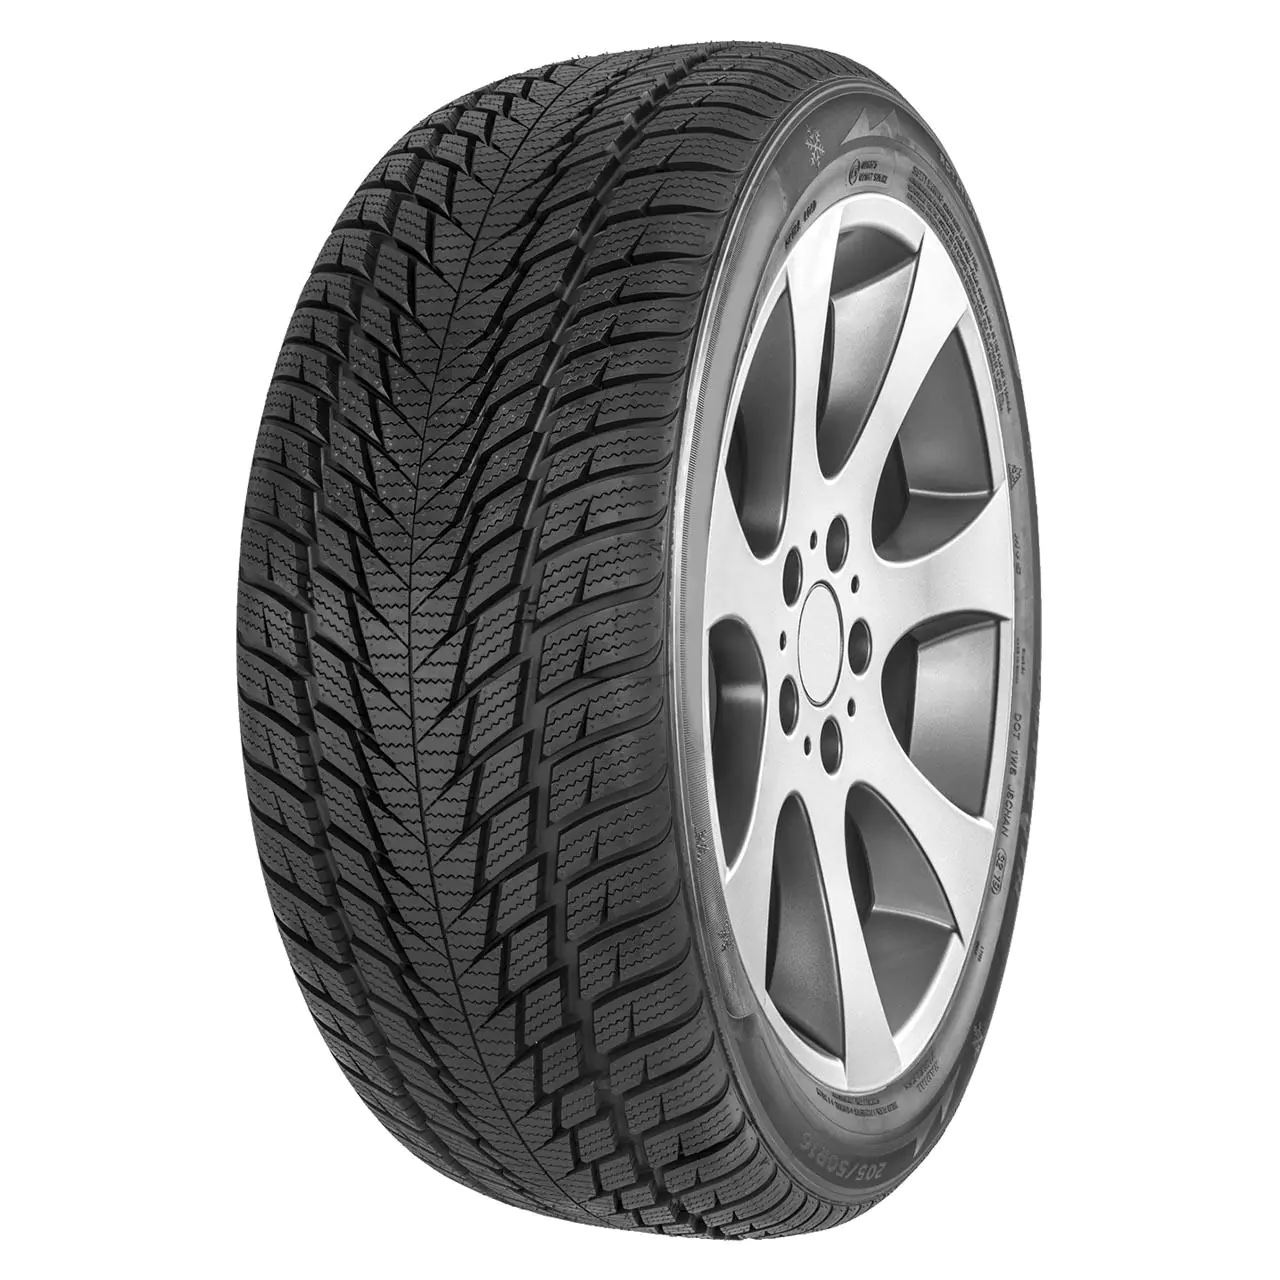 Gomme Autovettura Fortuna 215/55 R17 98V GOWIN UHP3 XL M+S Invernale